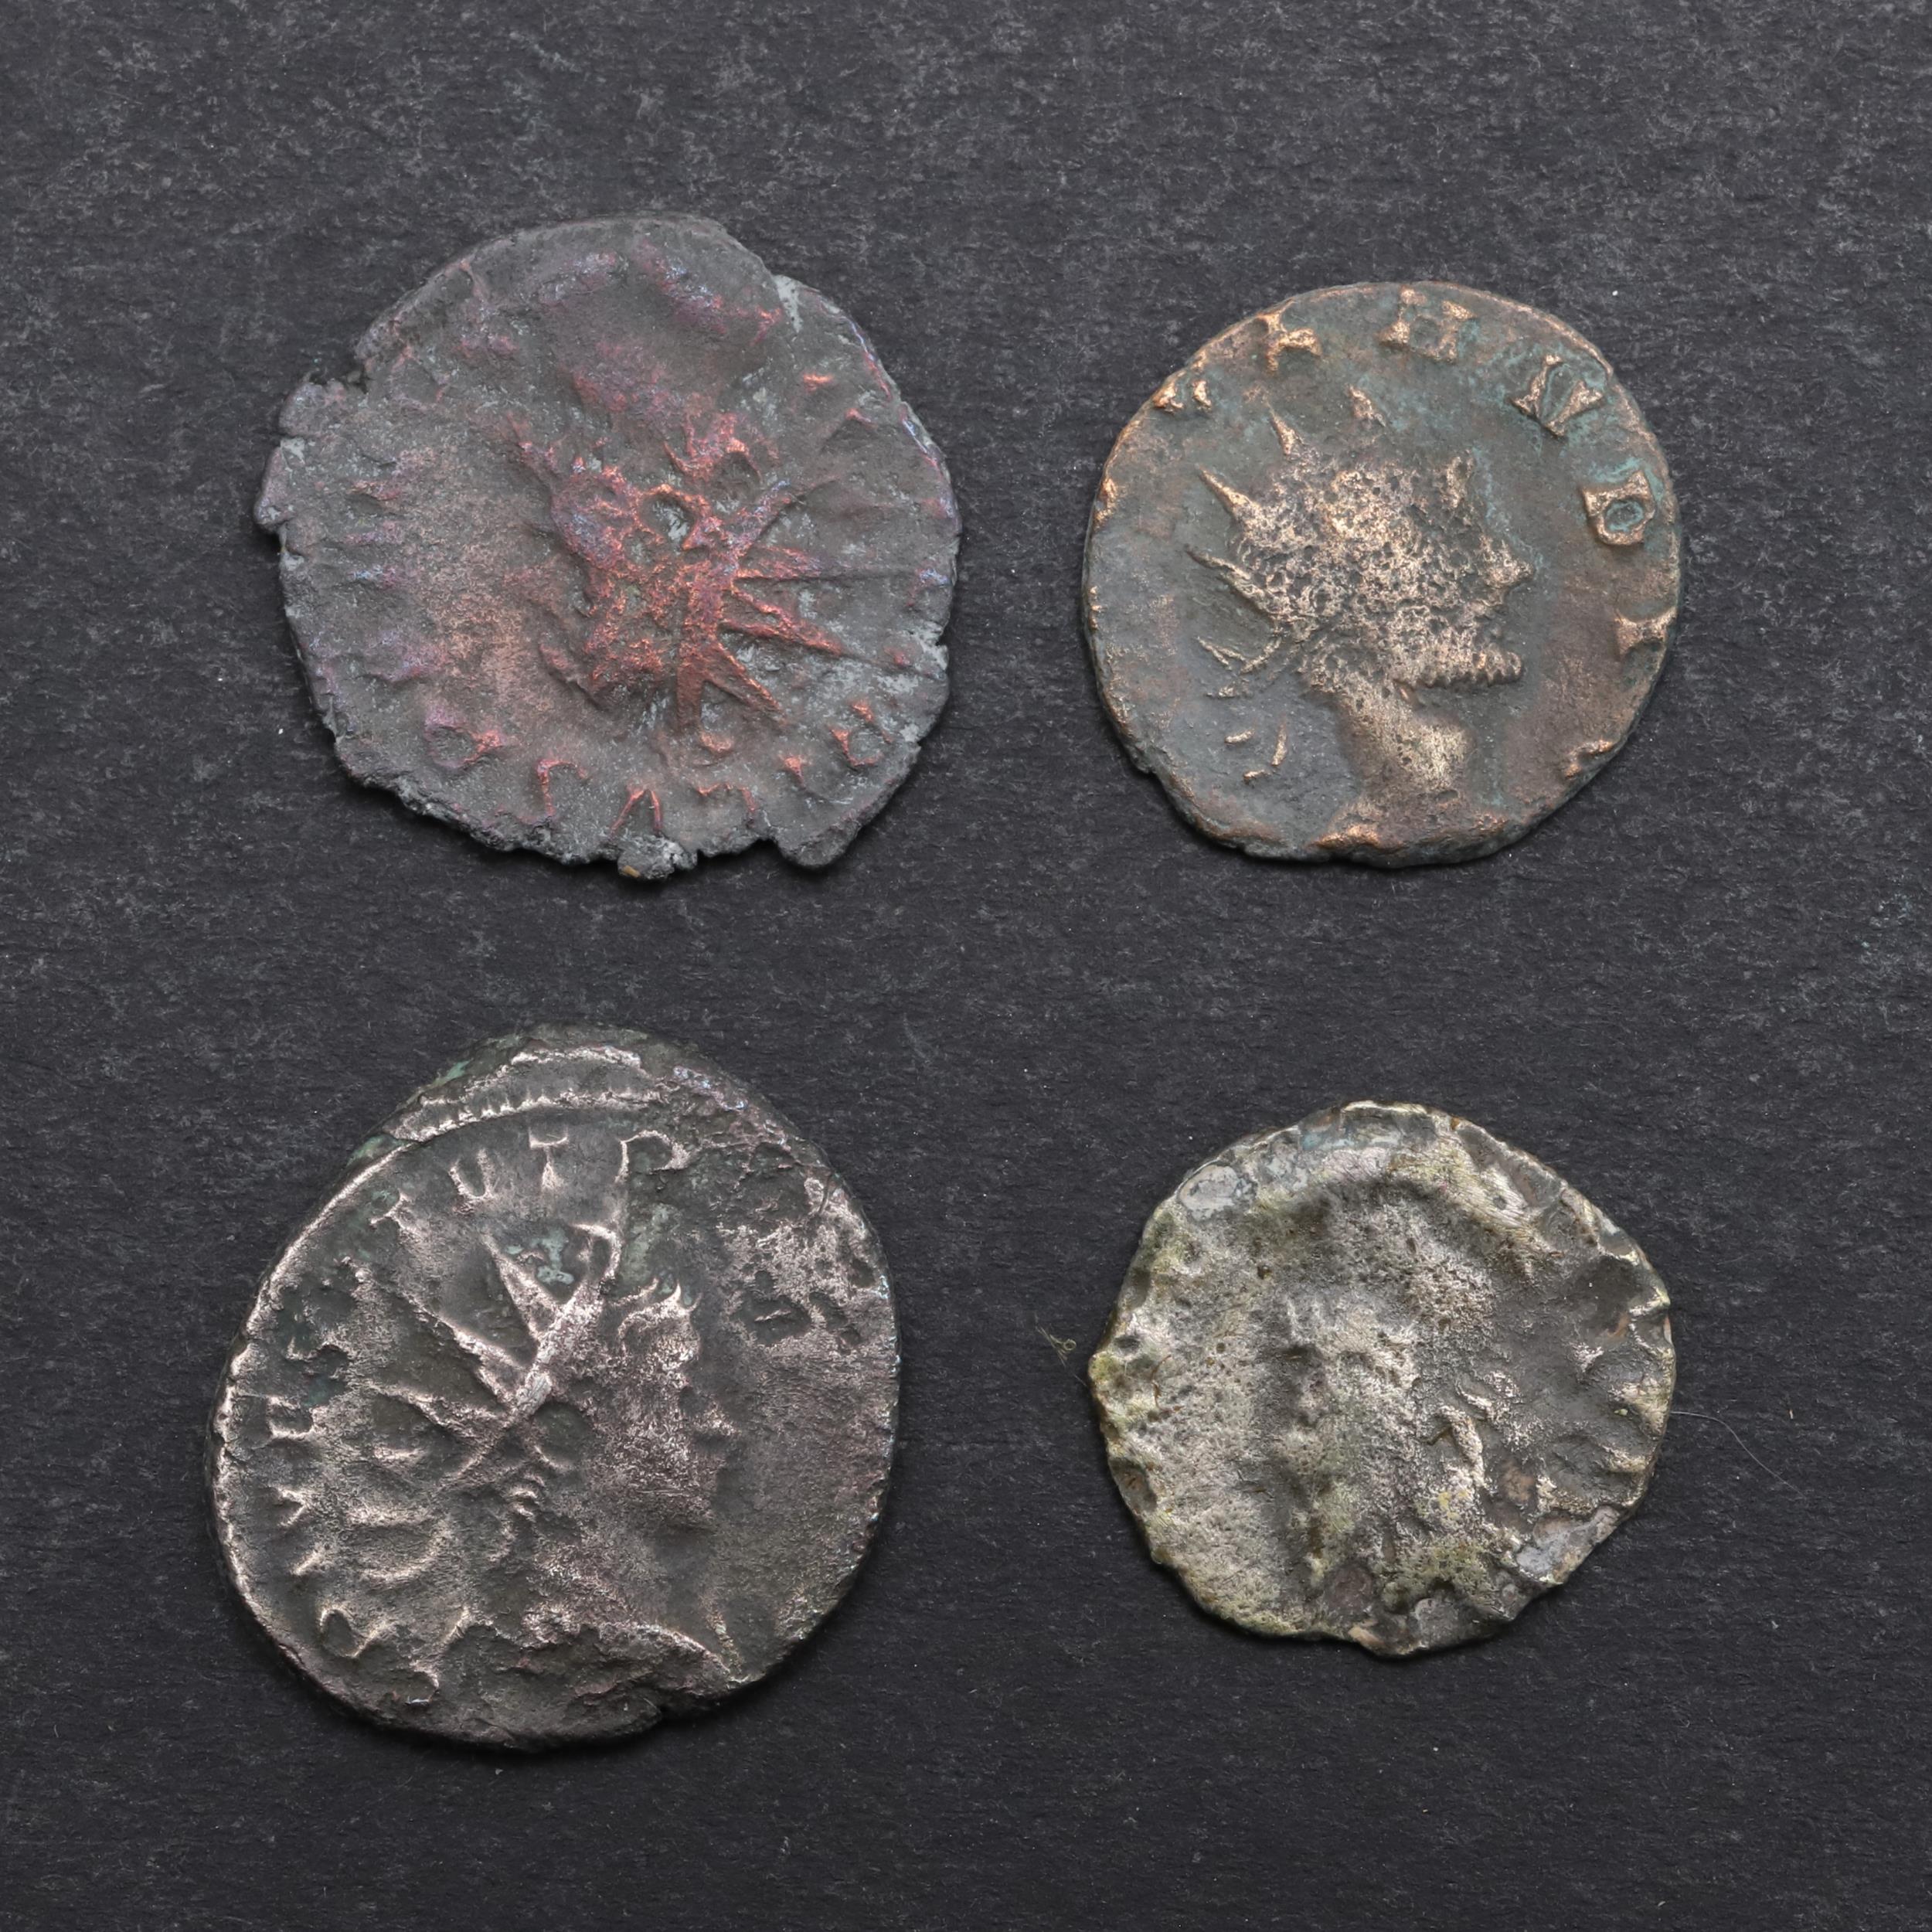 ROMAN IMPERIAL COINAGE: CLAUDIUS GOTHICUS, TACITUS I AND II, 268-273 A.D.